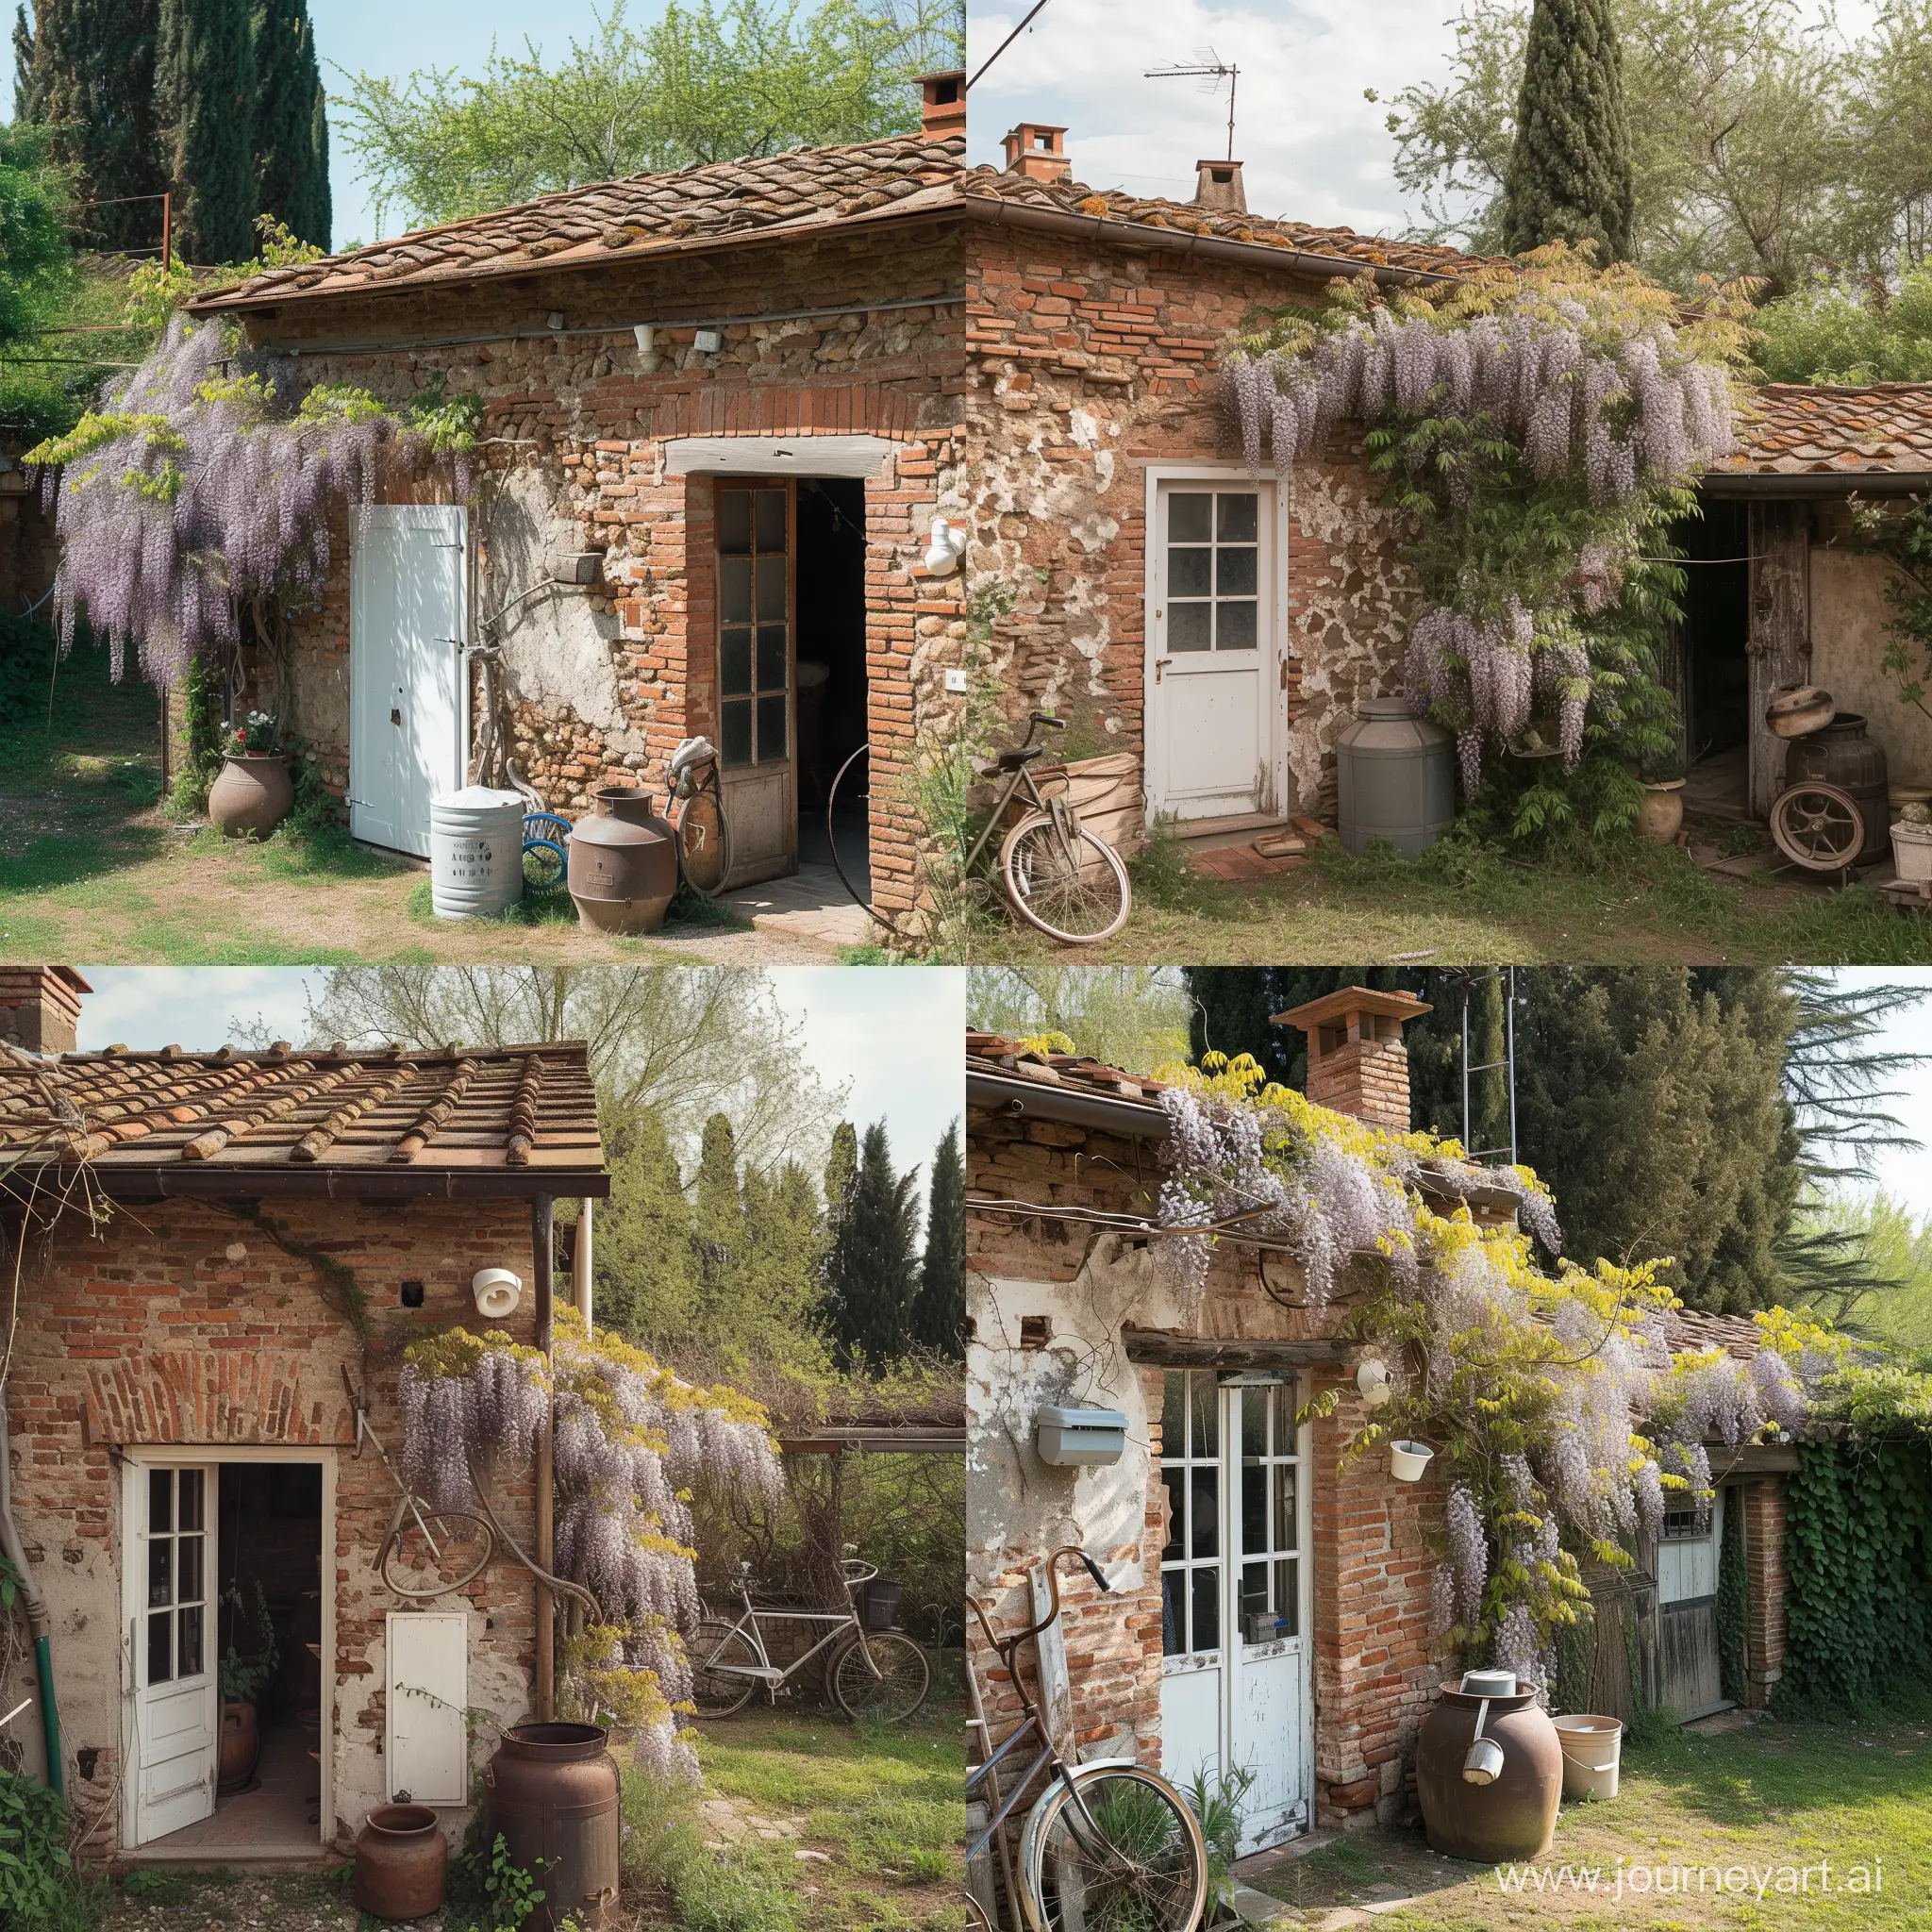 Idyllic-Tuscany-Farmhouse-with-Wisteria-Garden-and-Vintage-Accents